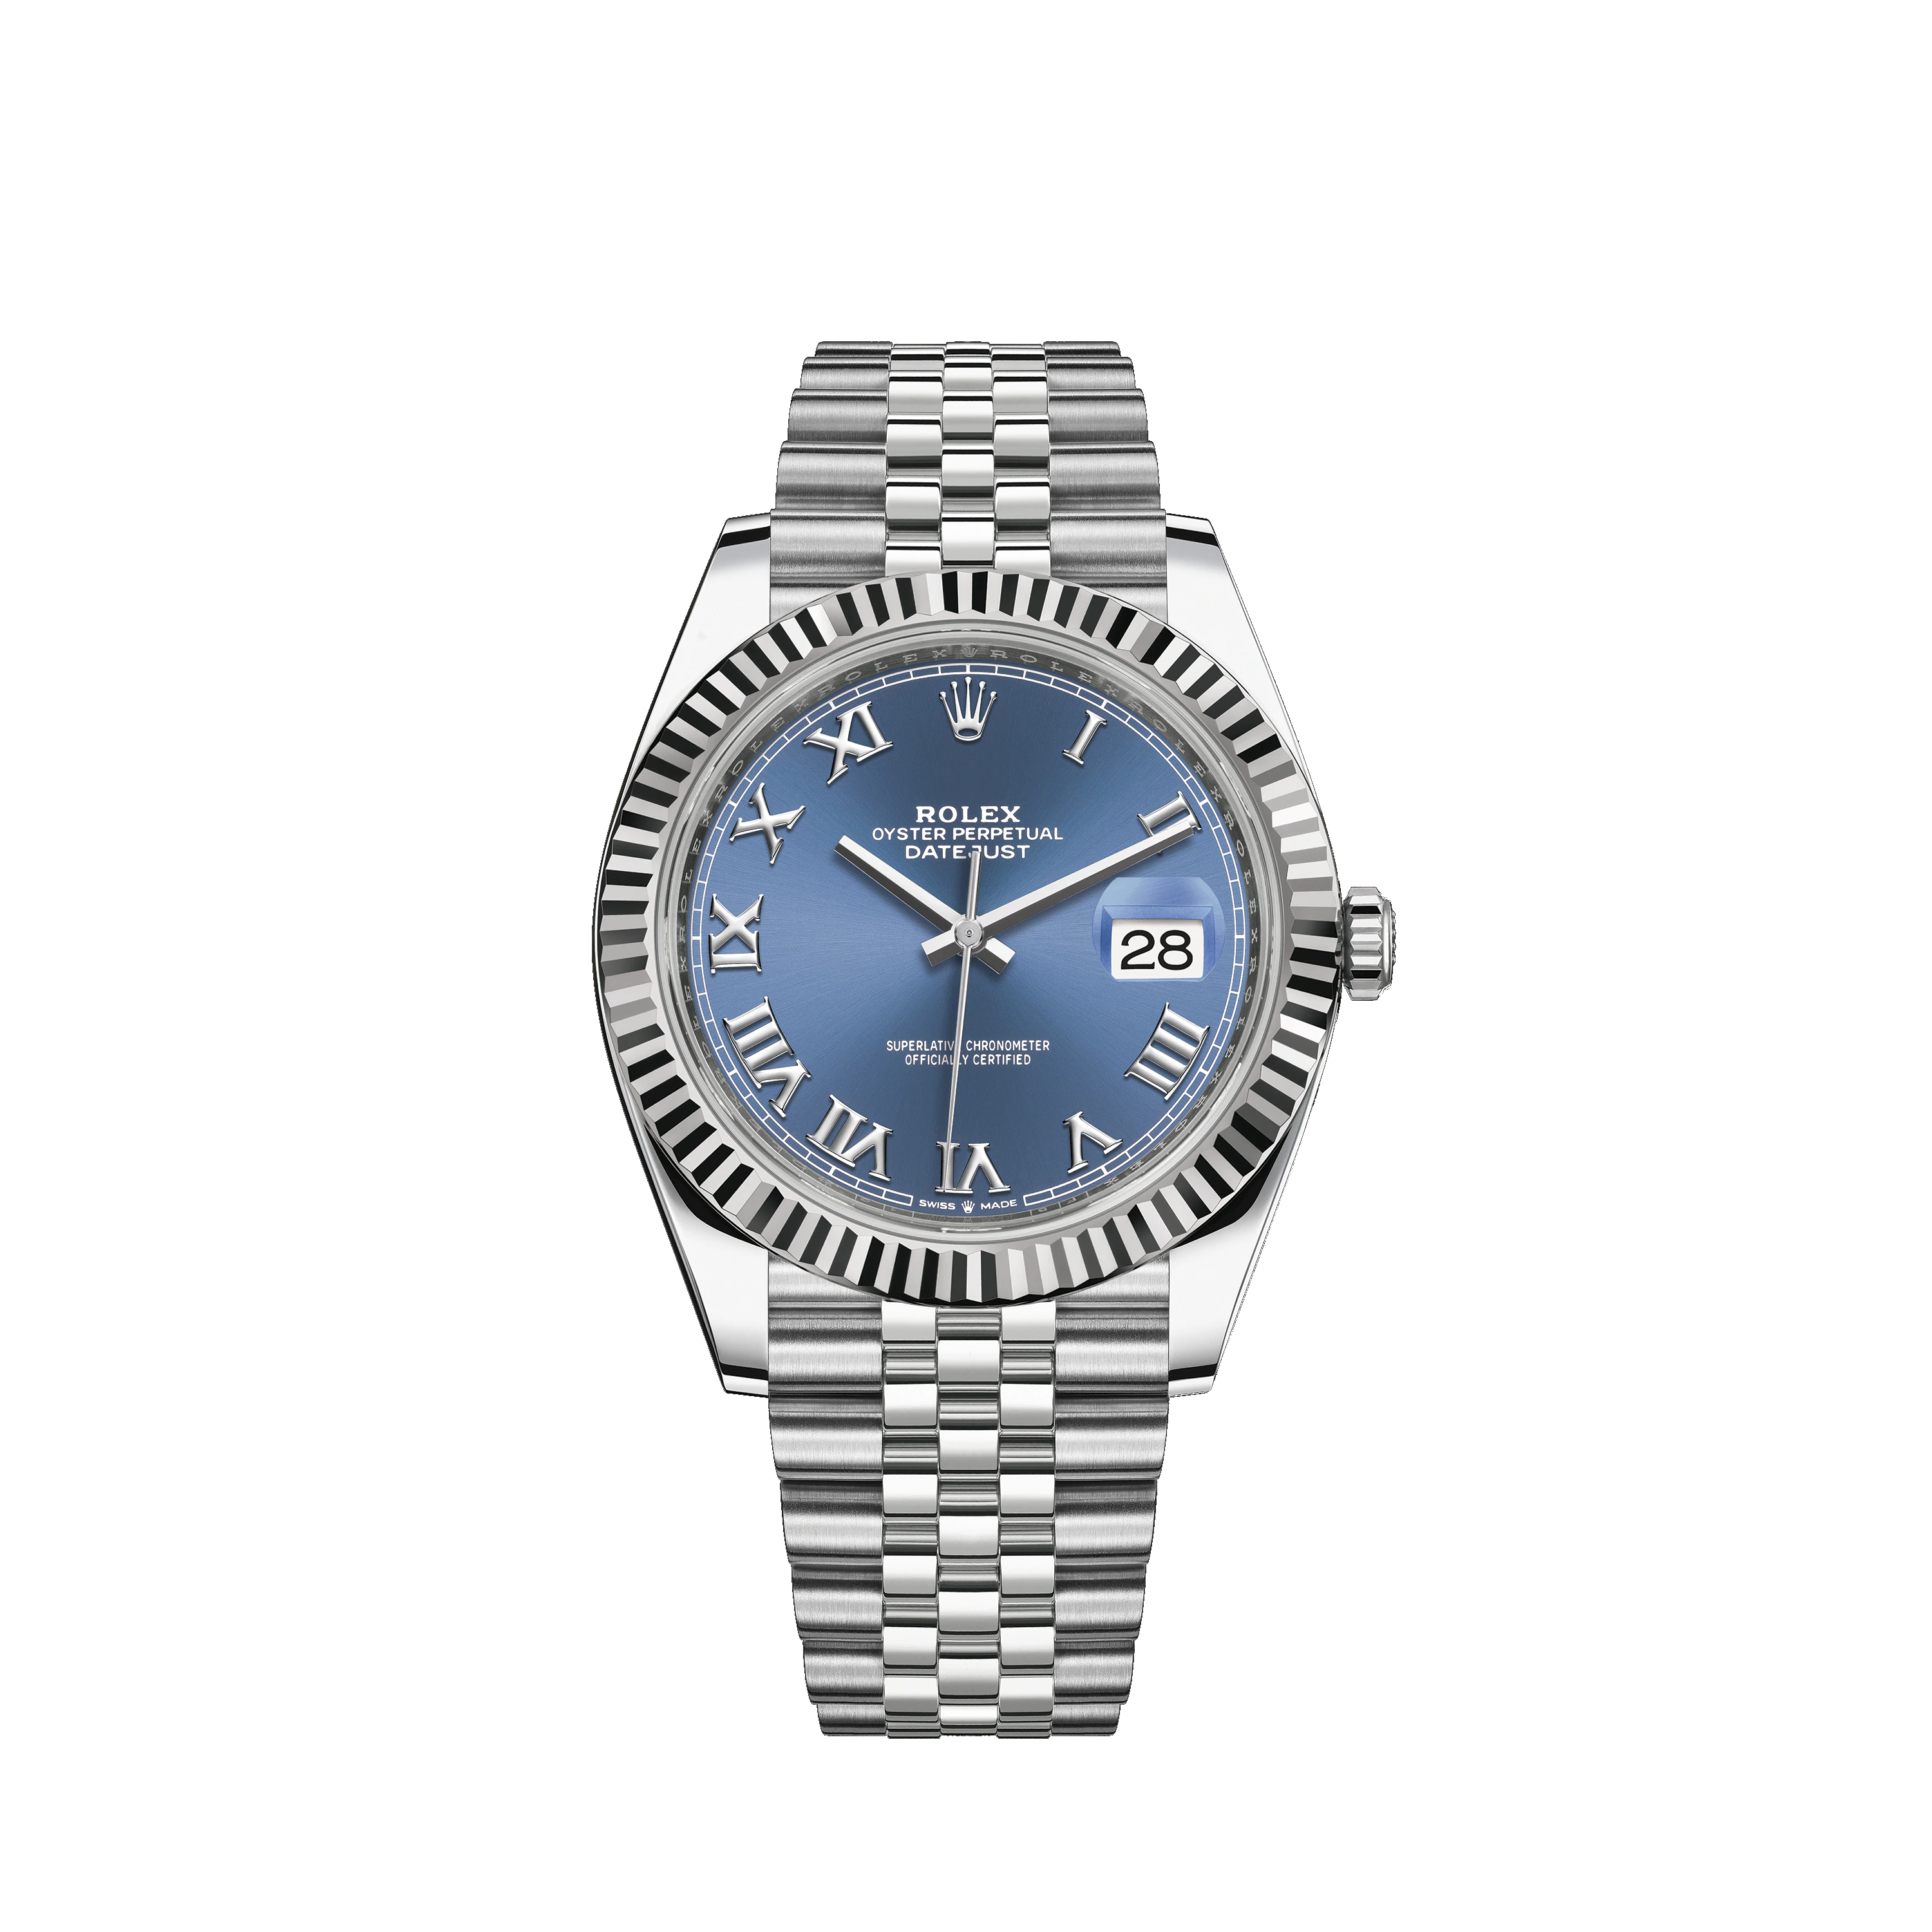 Datejust 41 126334 White Gold & Stainless Steel Watch (Blue)